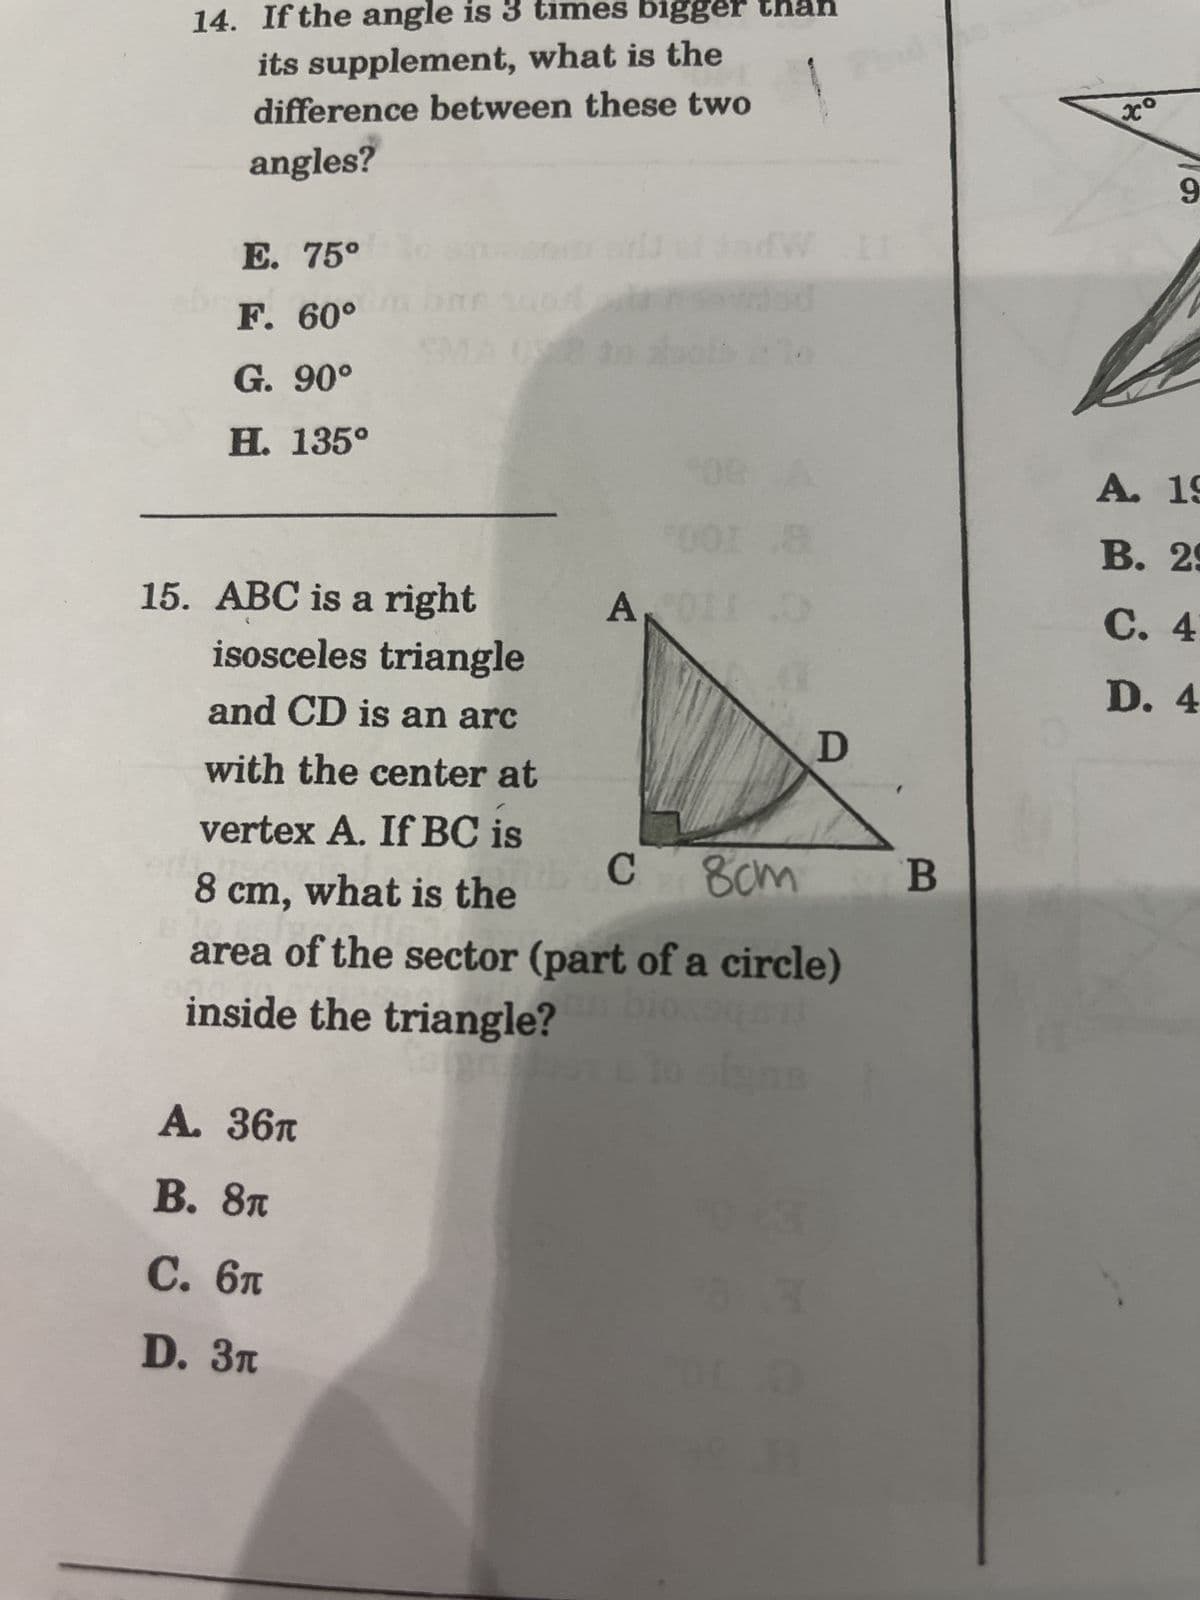 14. If the angle is 3 times bigger
its supplement, what is the
difference between these two
angles?
E. 75°
F. 60°
G. 90°
H. 135°
15. ABC is a right
isosceles triangle
and CD is an arc
with the center at
ra
A. 36T
B. 8T
C. 6T
D. 3п
A₁
10
vertex A. If BC is
8 cm, what is the
с
8cm
area of the sector (part of a circle)
inside the triangle?
bioqr
e to ofgn
18
10 CSE
D
(0
nd
B
xo
9
A. 19
B. 29
C. 4
D. 4